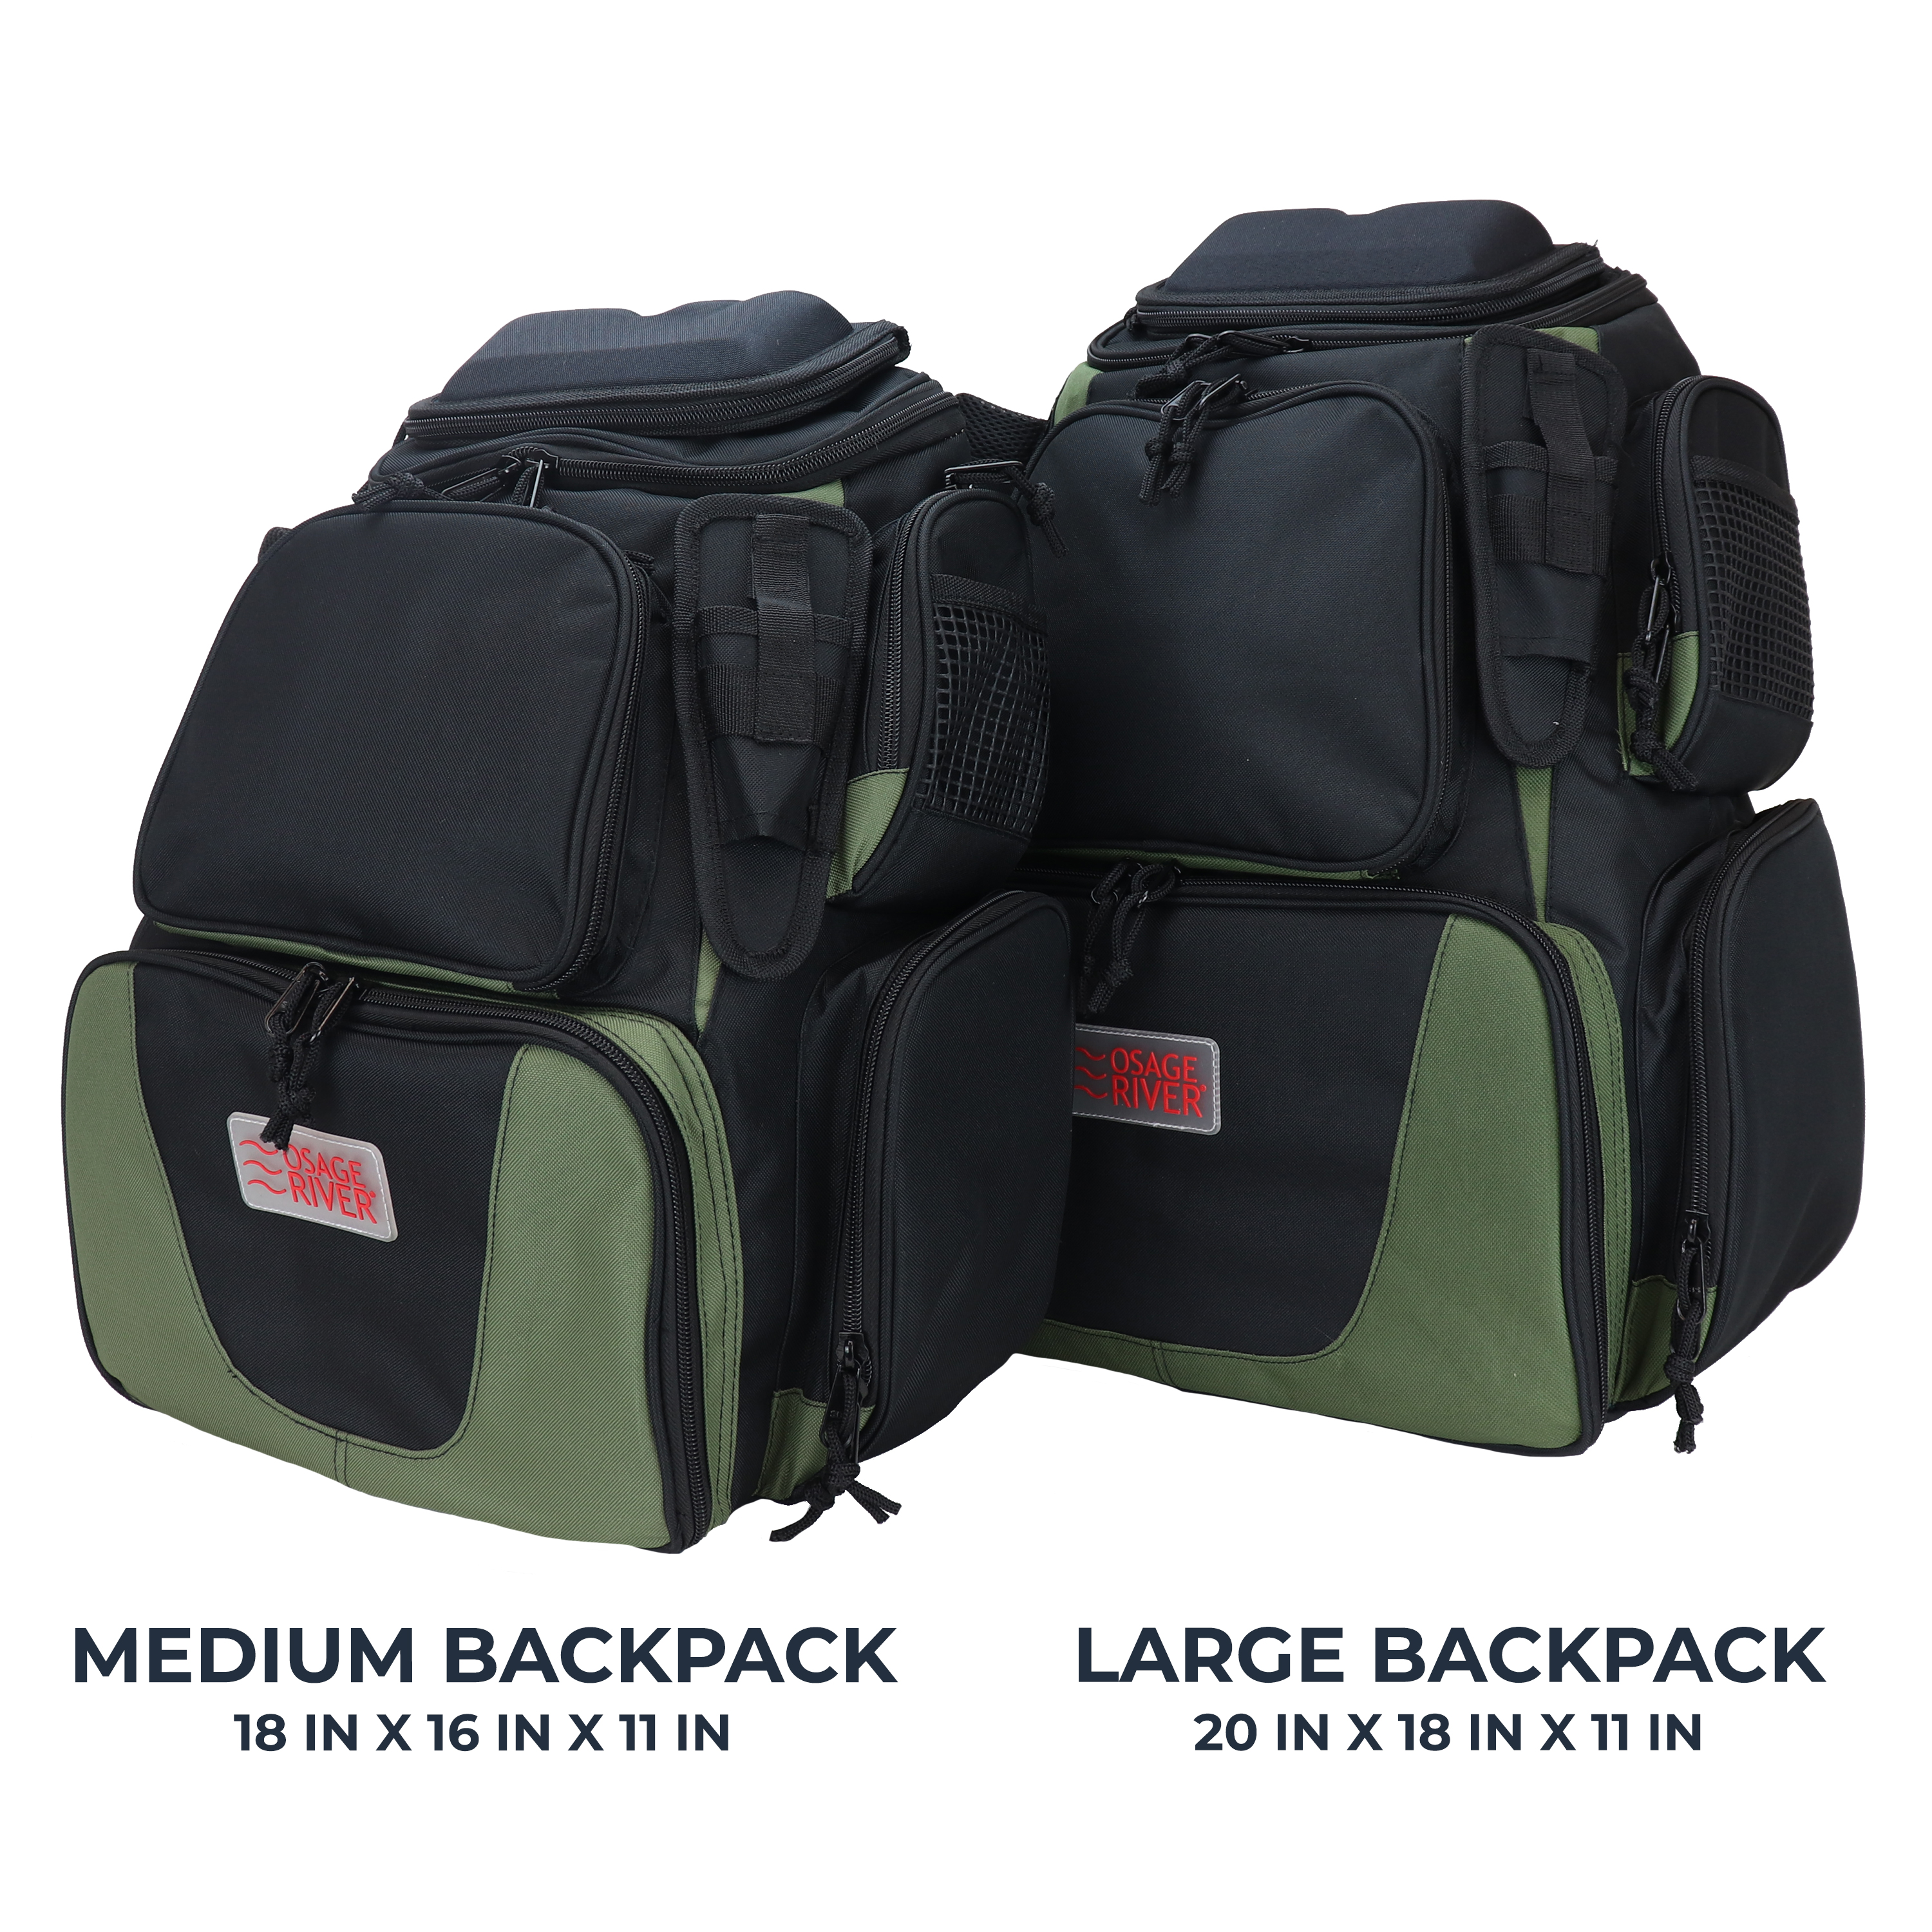 Osage River: Fishing Tackle Backpack $25, Fishing Backpack w/ 4